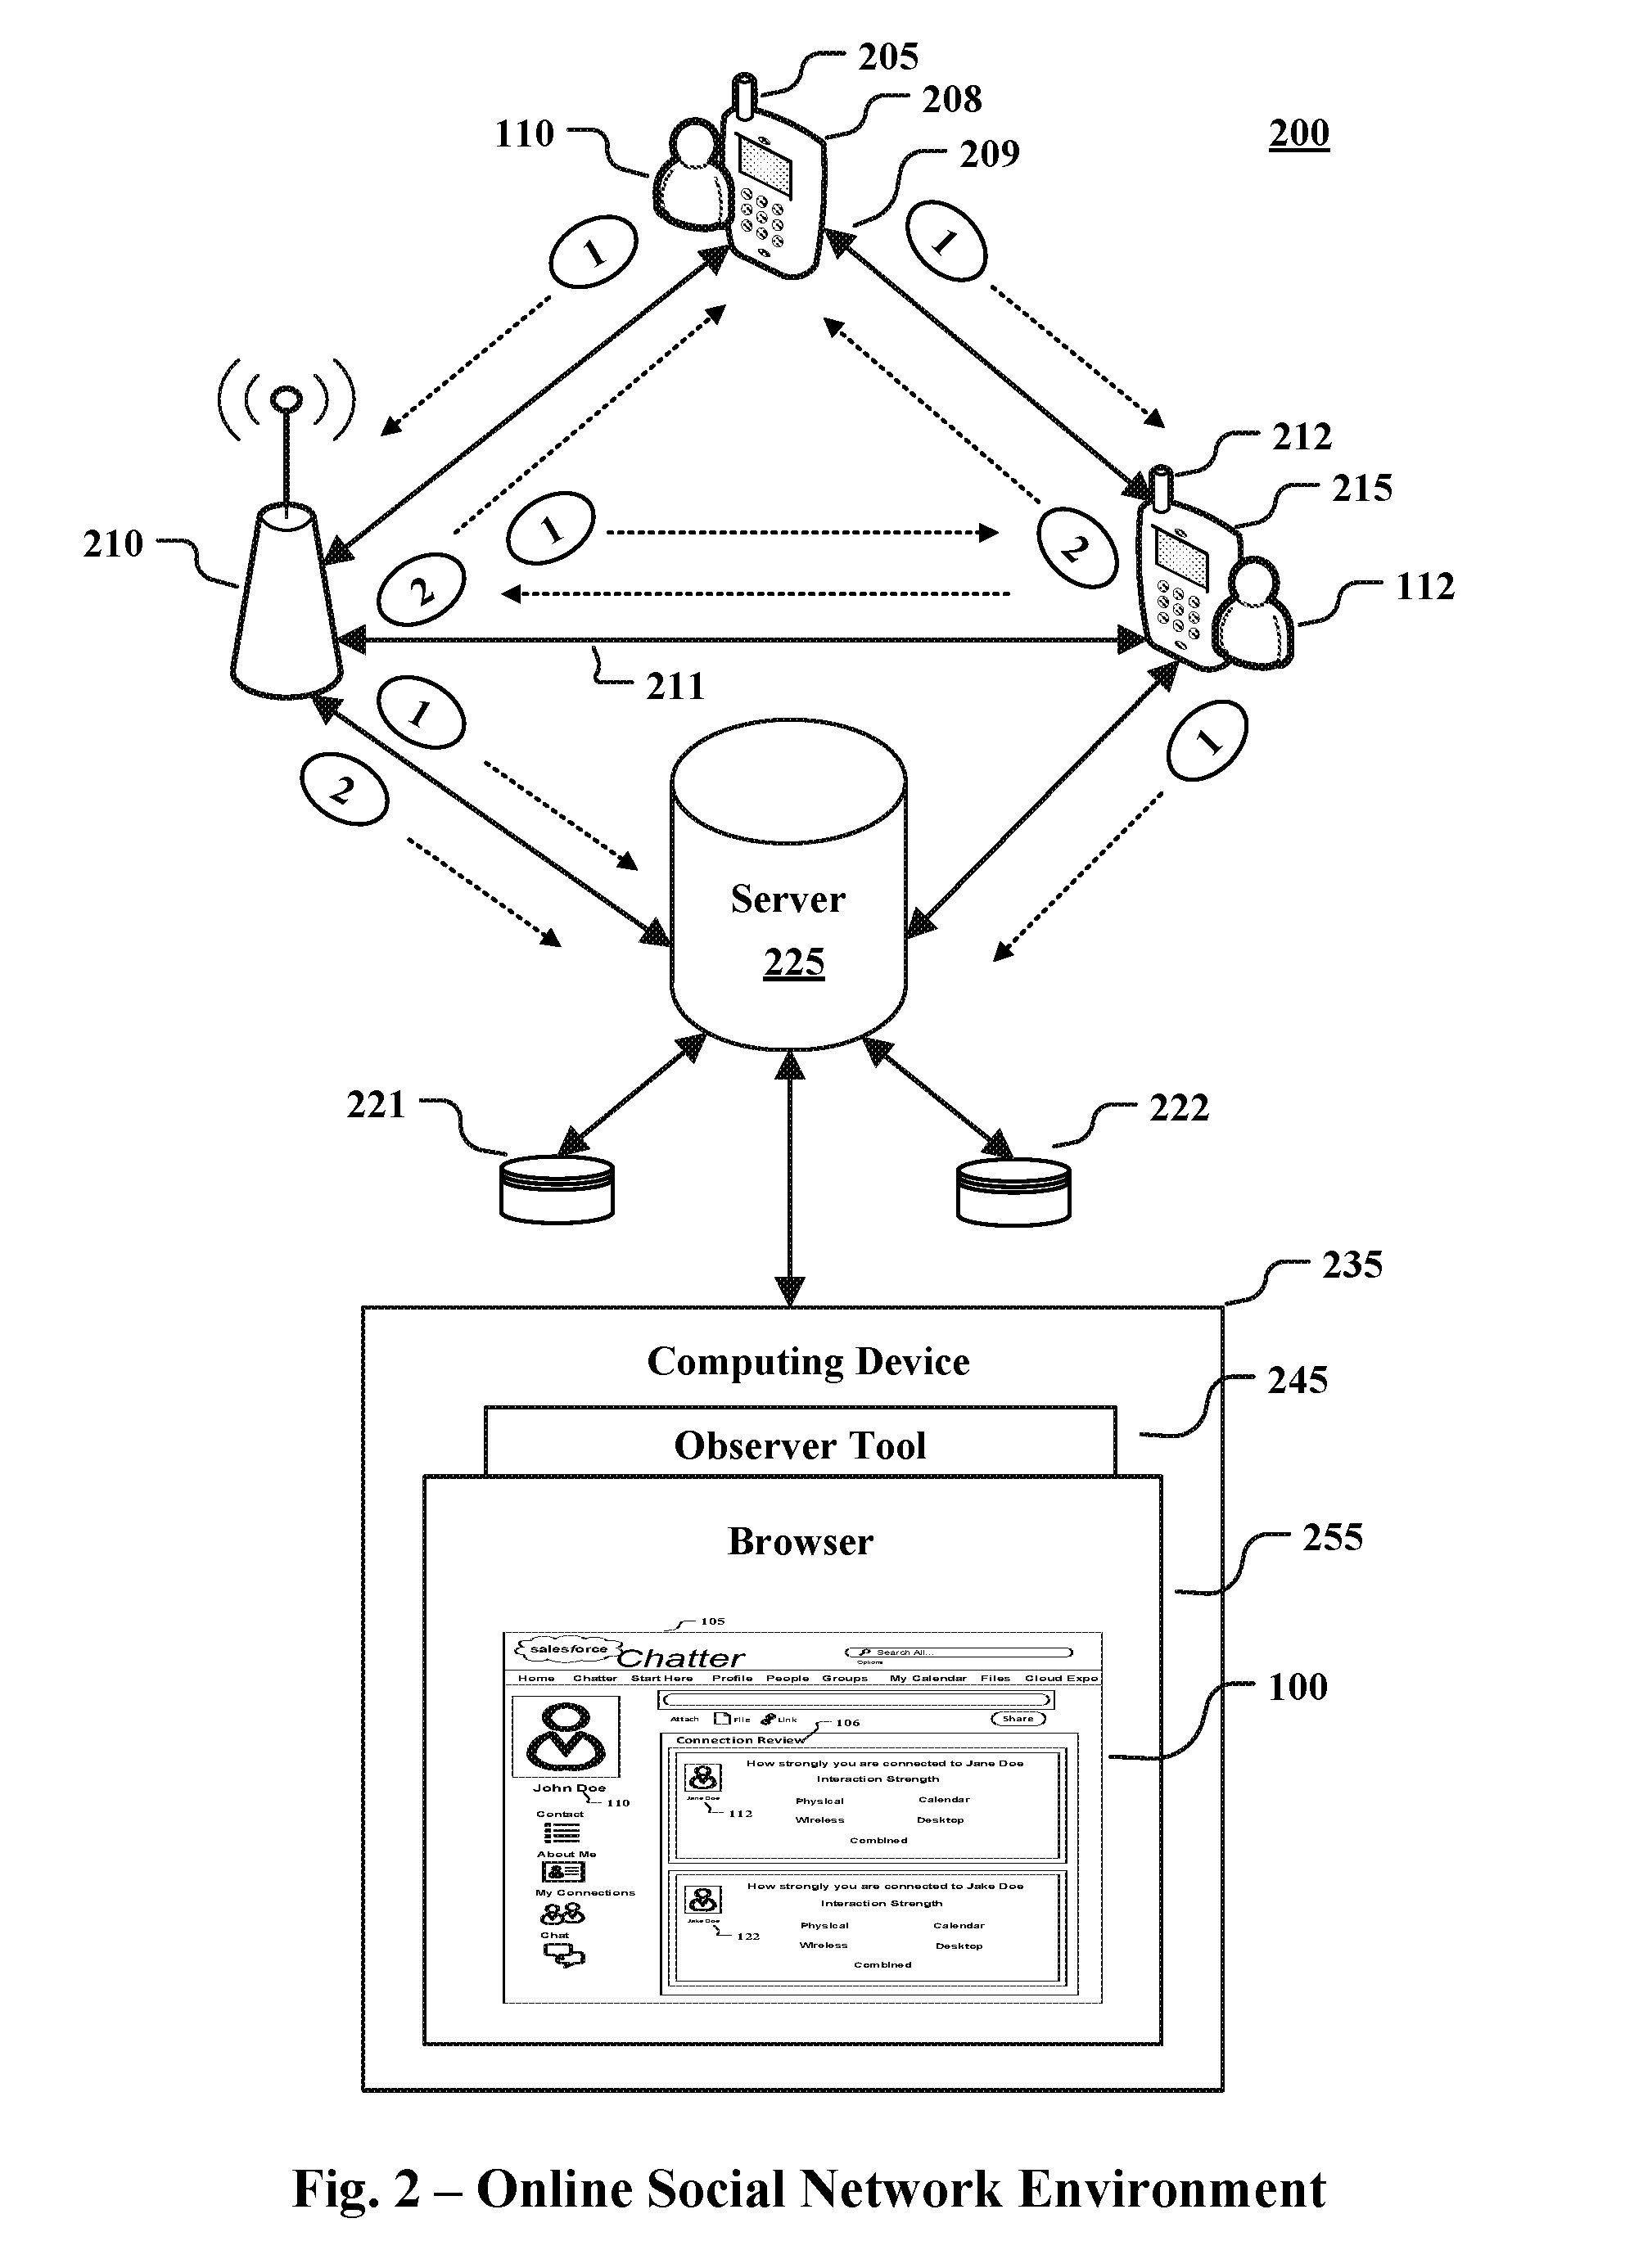 Displaying aggregated connection data using a database system